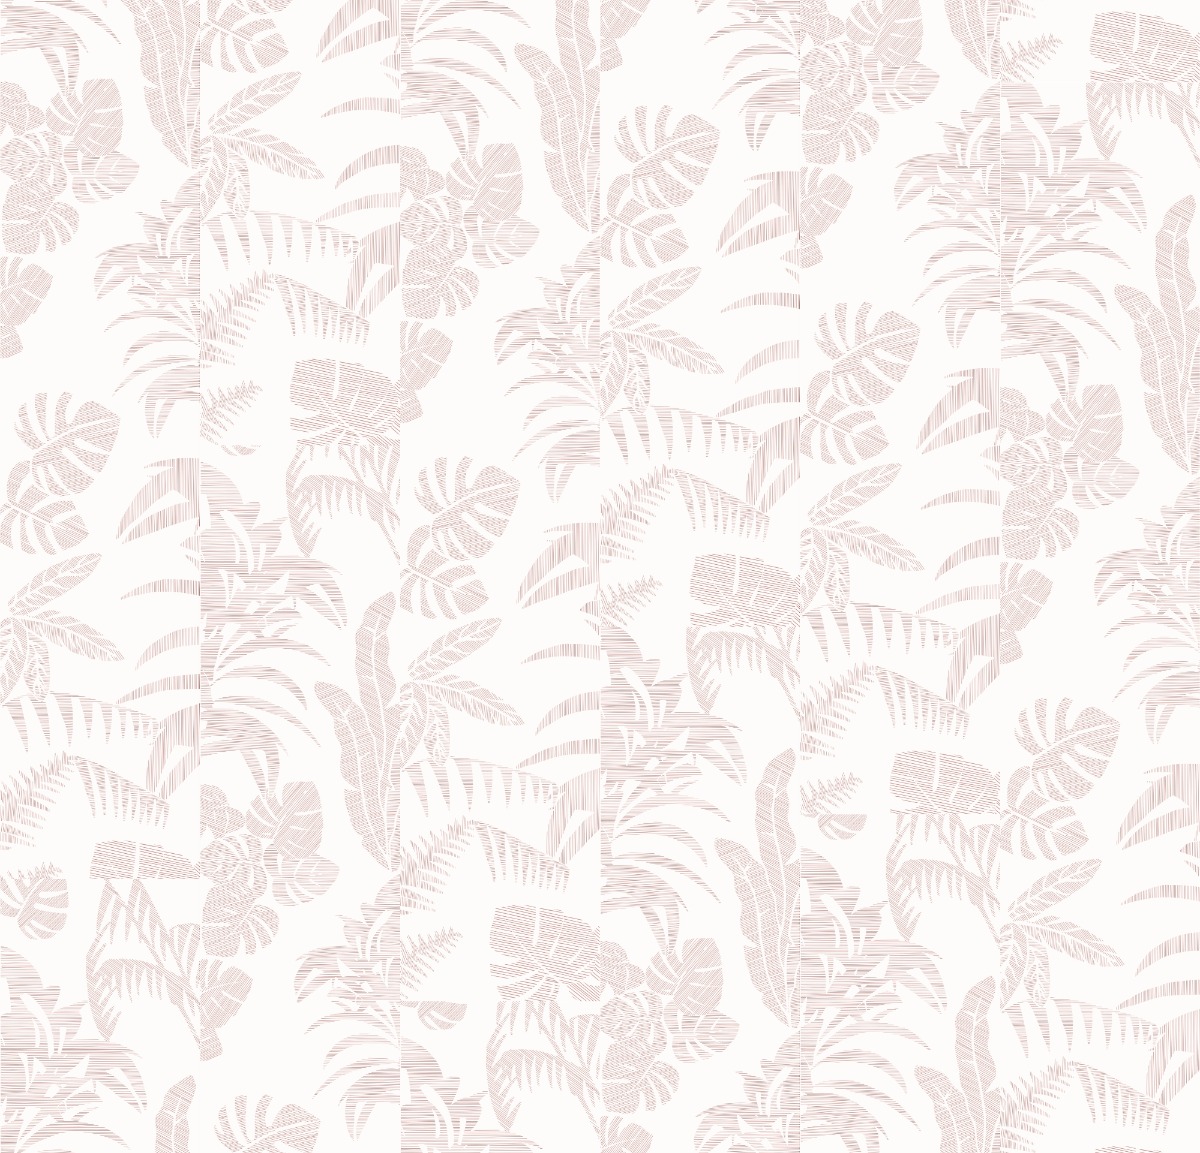 A seamless wallpaper texture with flourish wallpaper in rose units arranged in a  pattern